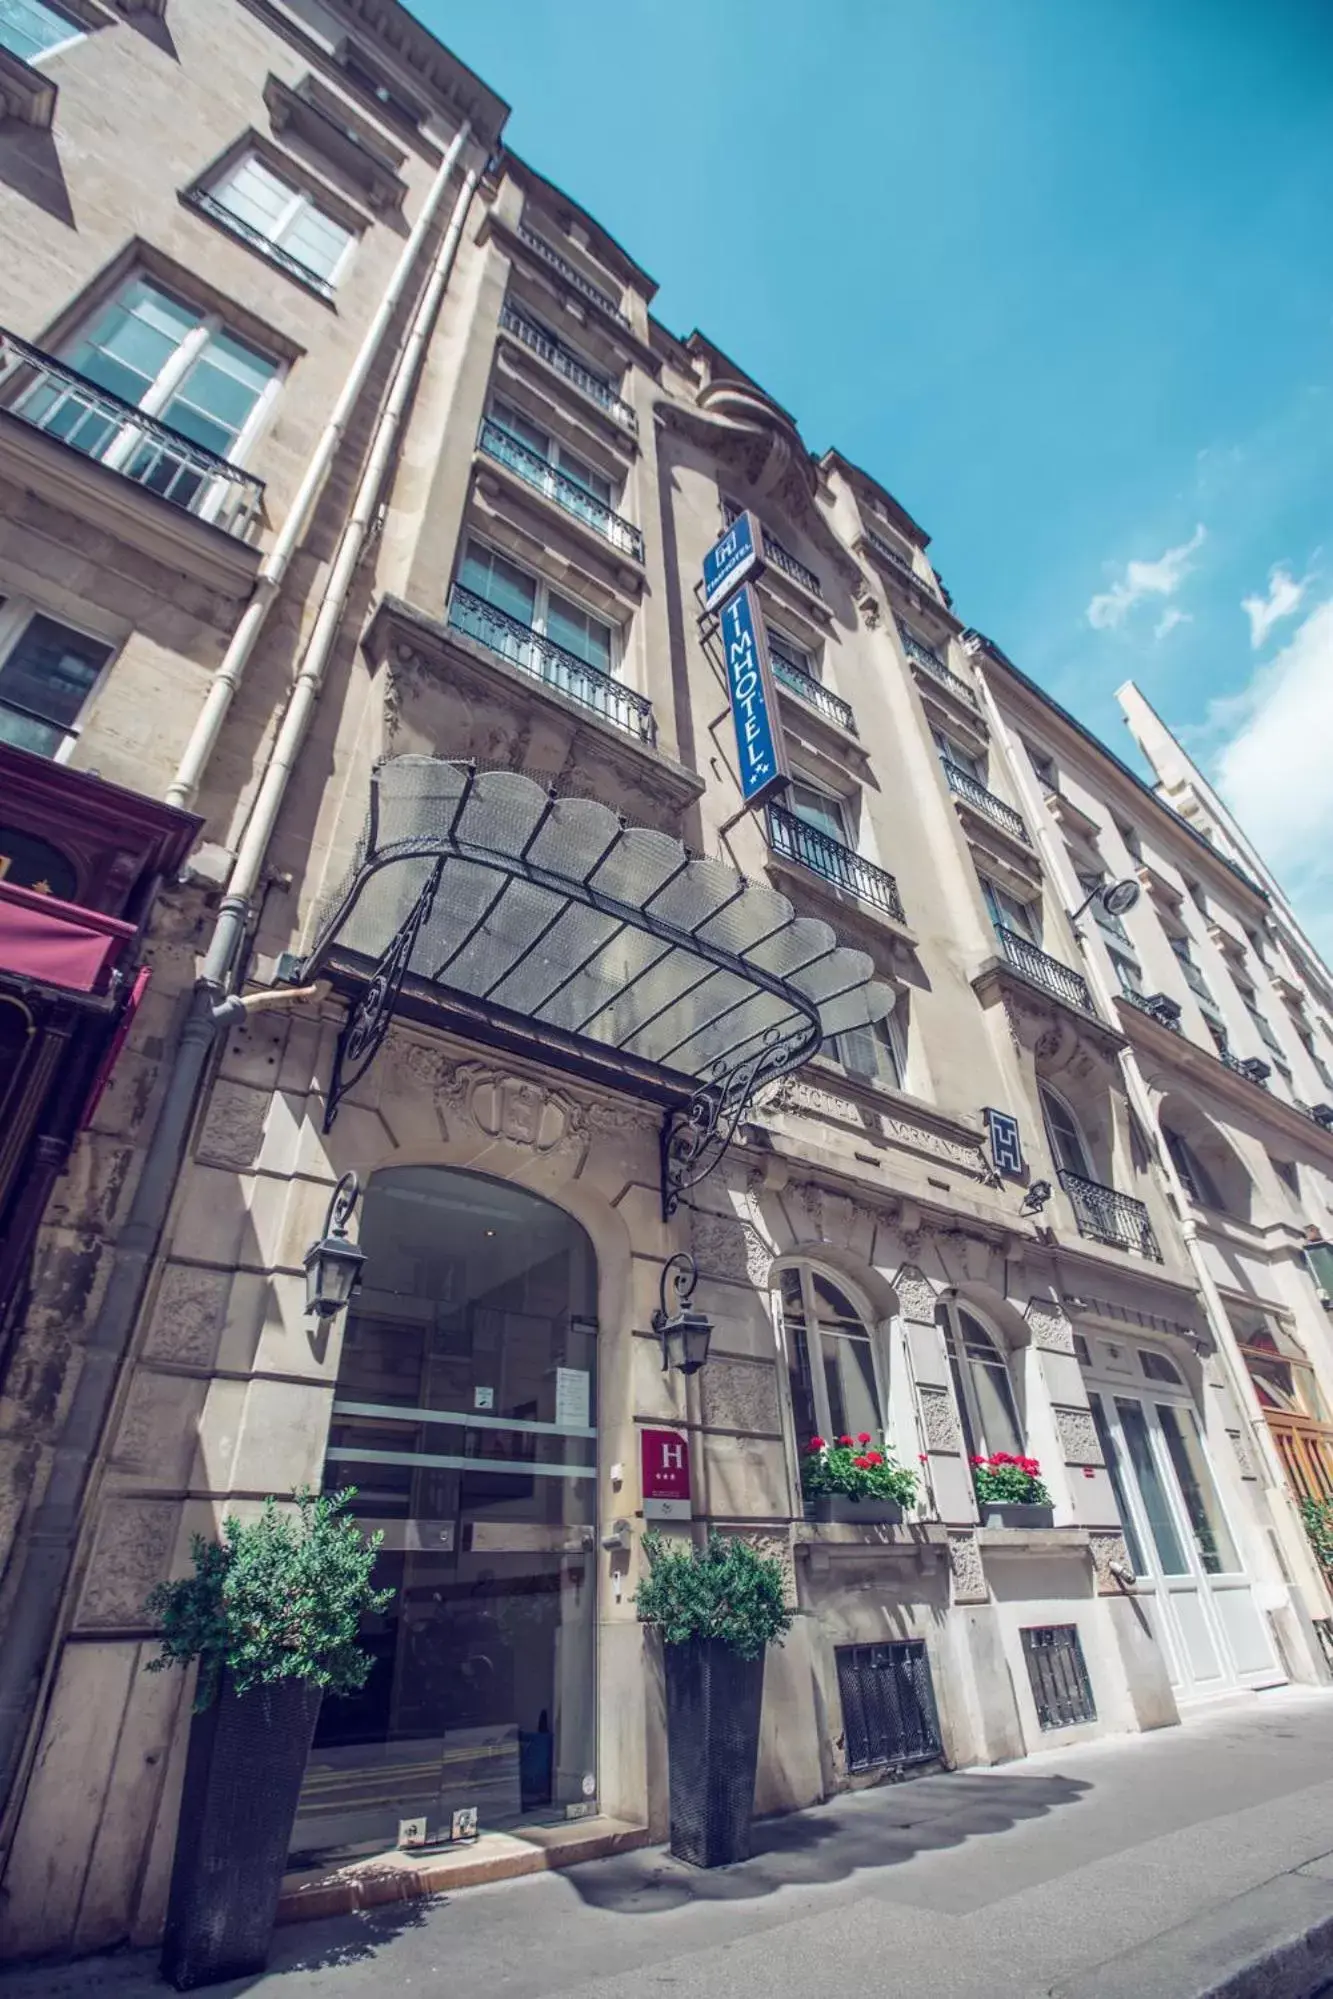 Property Building in Timhotel Palais Royal